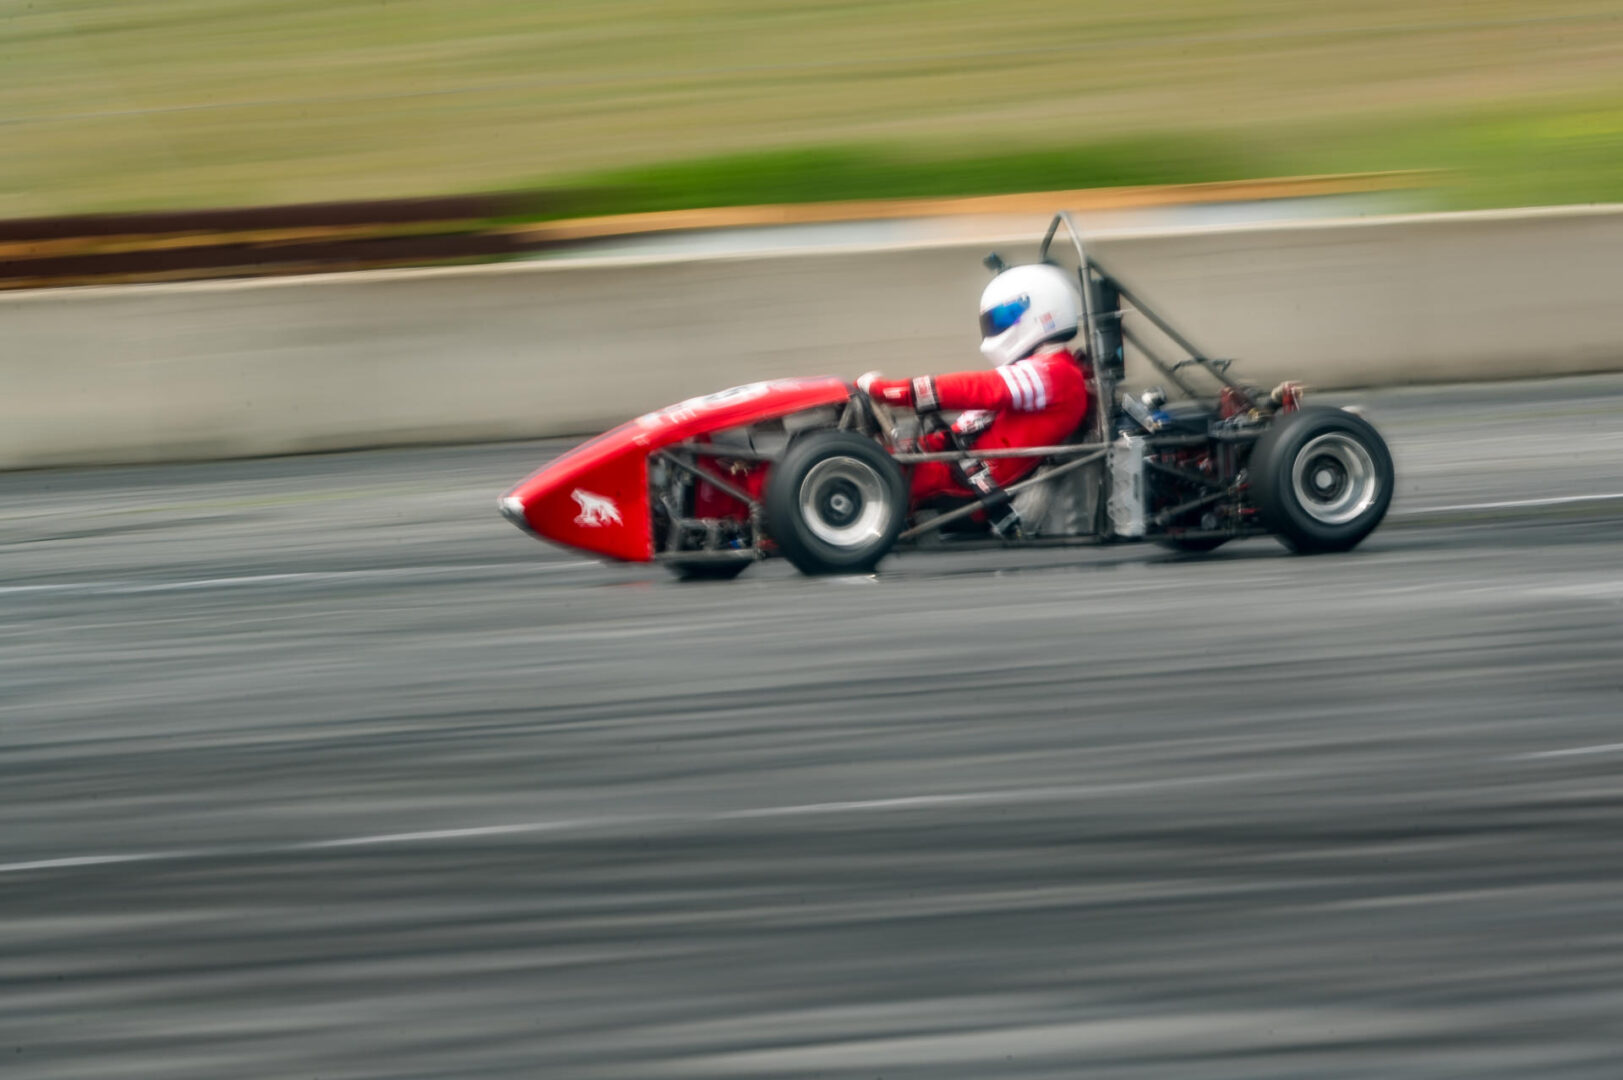 Andre Fatehi is photographed while he test drives a red Formula SAE vehicle at Thunderhill Raceway.